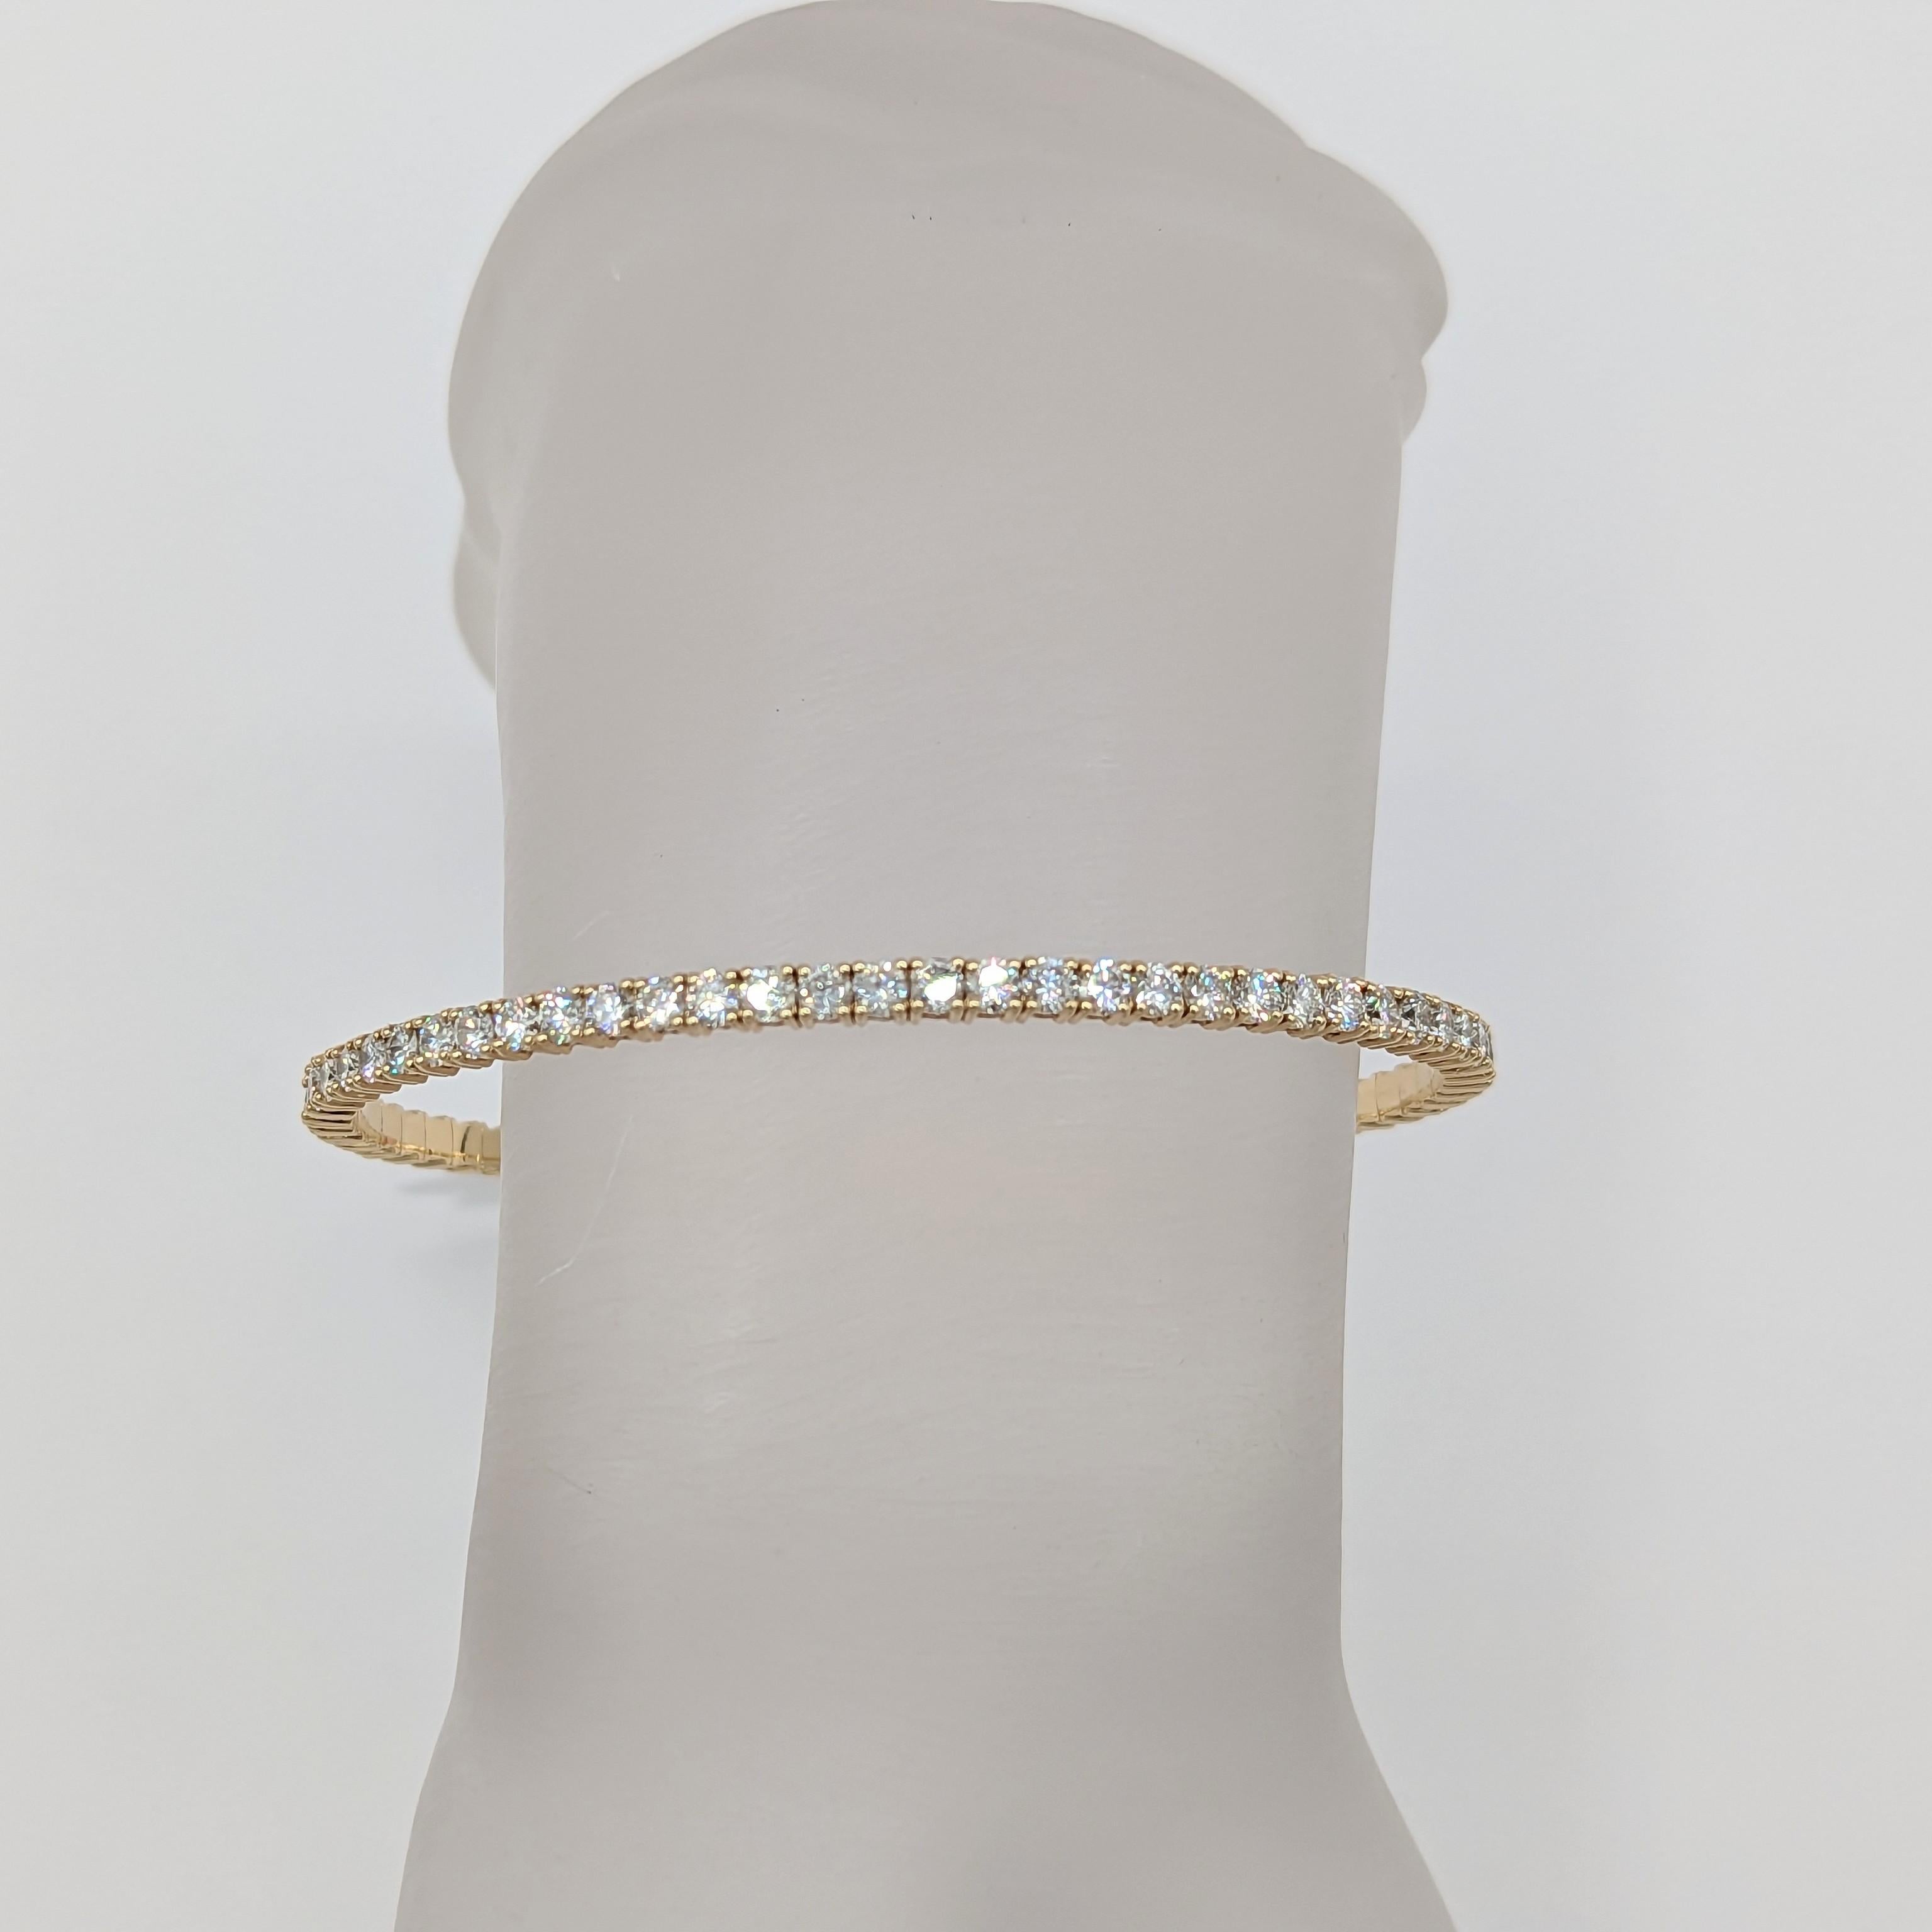 Beautiful 5.05 ct. white diamond rounds.  Handmade in 14k yellow gold.  This bangle is unique because it is flexible, making it more comfortable to wear.  